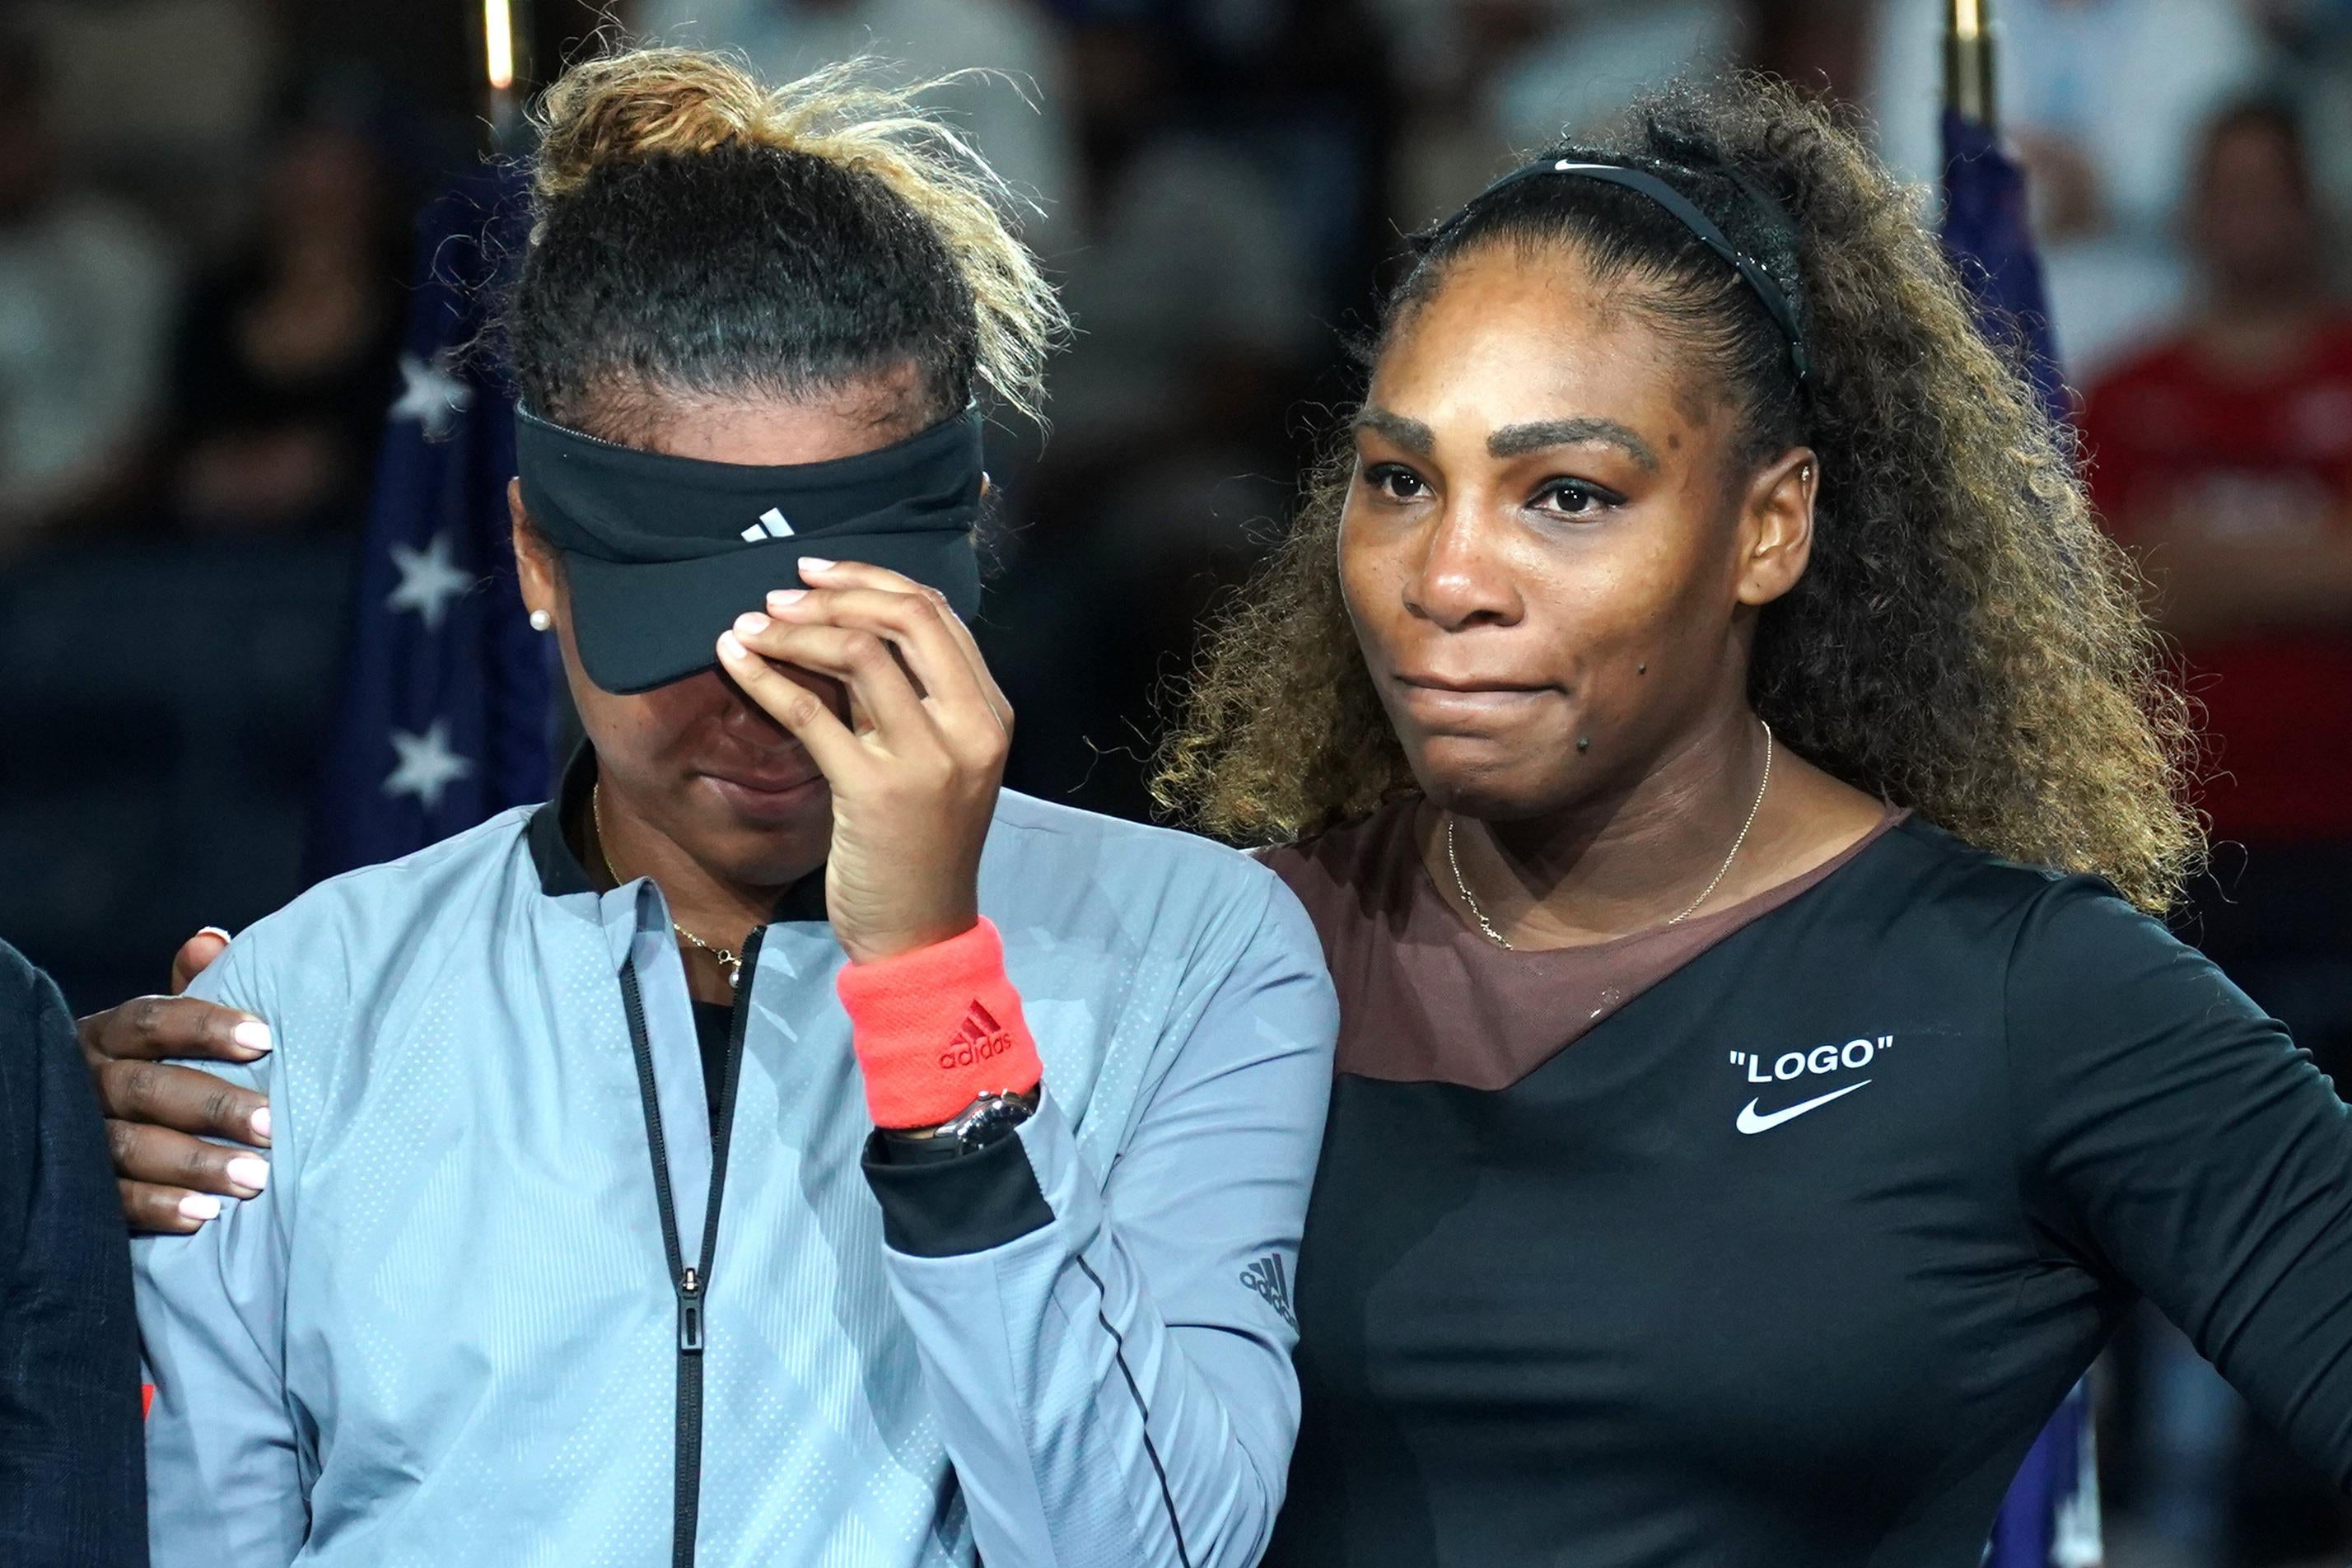 The victor Naomi Osaka of Japan (L) stands beside the defeated Serena Williams of the US following their Women's Singles Finals match at the 2018 US Open at the USTA Billie Jean King National Tennis Center in New York on September 8, 2018. - Osaka, 20, triumphed 6-2, 6-4 in the match marred by Williams's second set outburst, the American enraged by umpire Carlos Ramos's warning for receiving coaching from her box. She tearfully accused him of being a 'thief' and demanded an apology from the official. (Photo by TIMOTHY A. CLARY / AFP)        (Photo credit should read TIMOTHY A. CLARY/AFP/Getty Images)